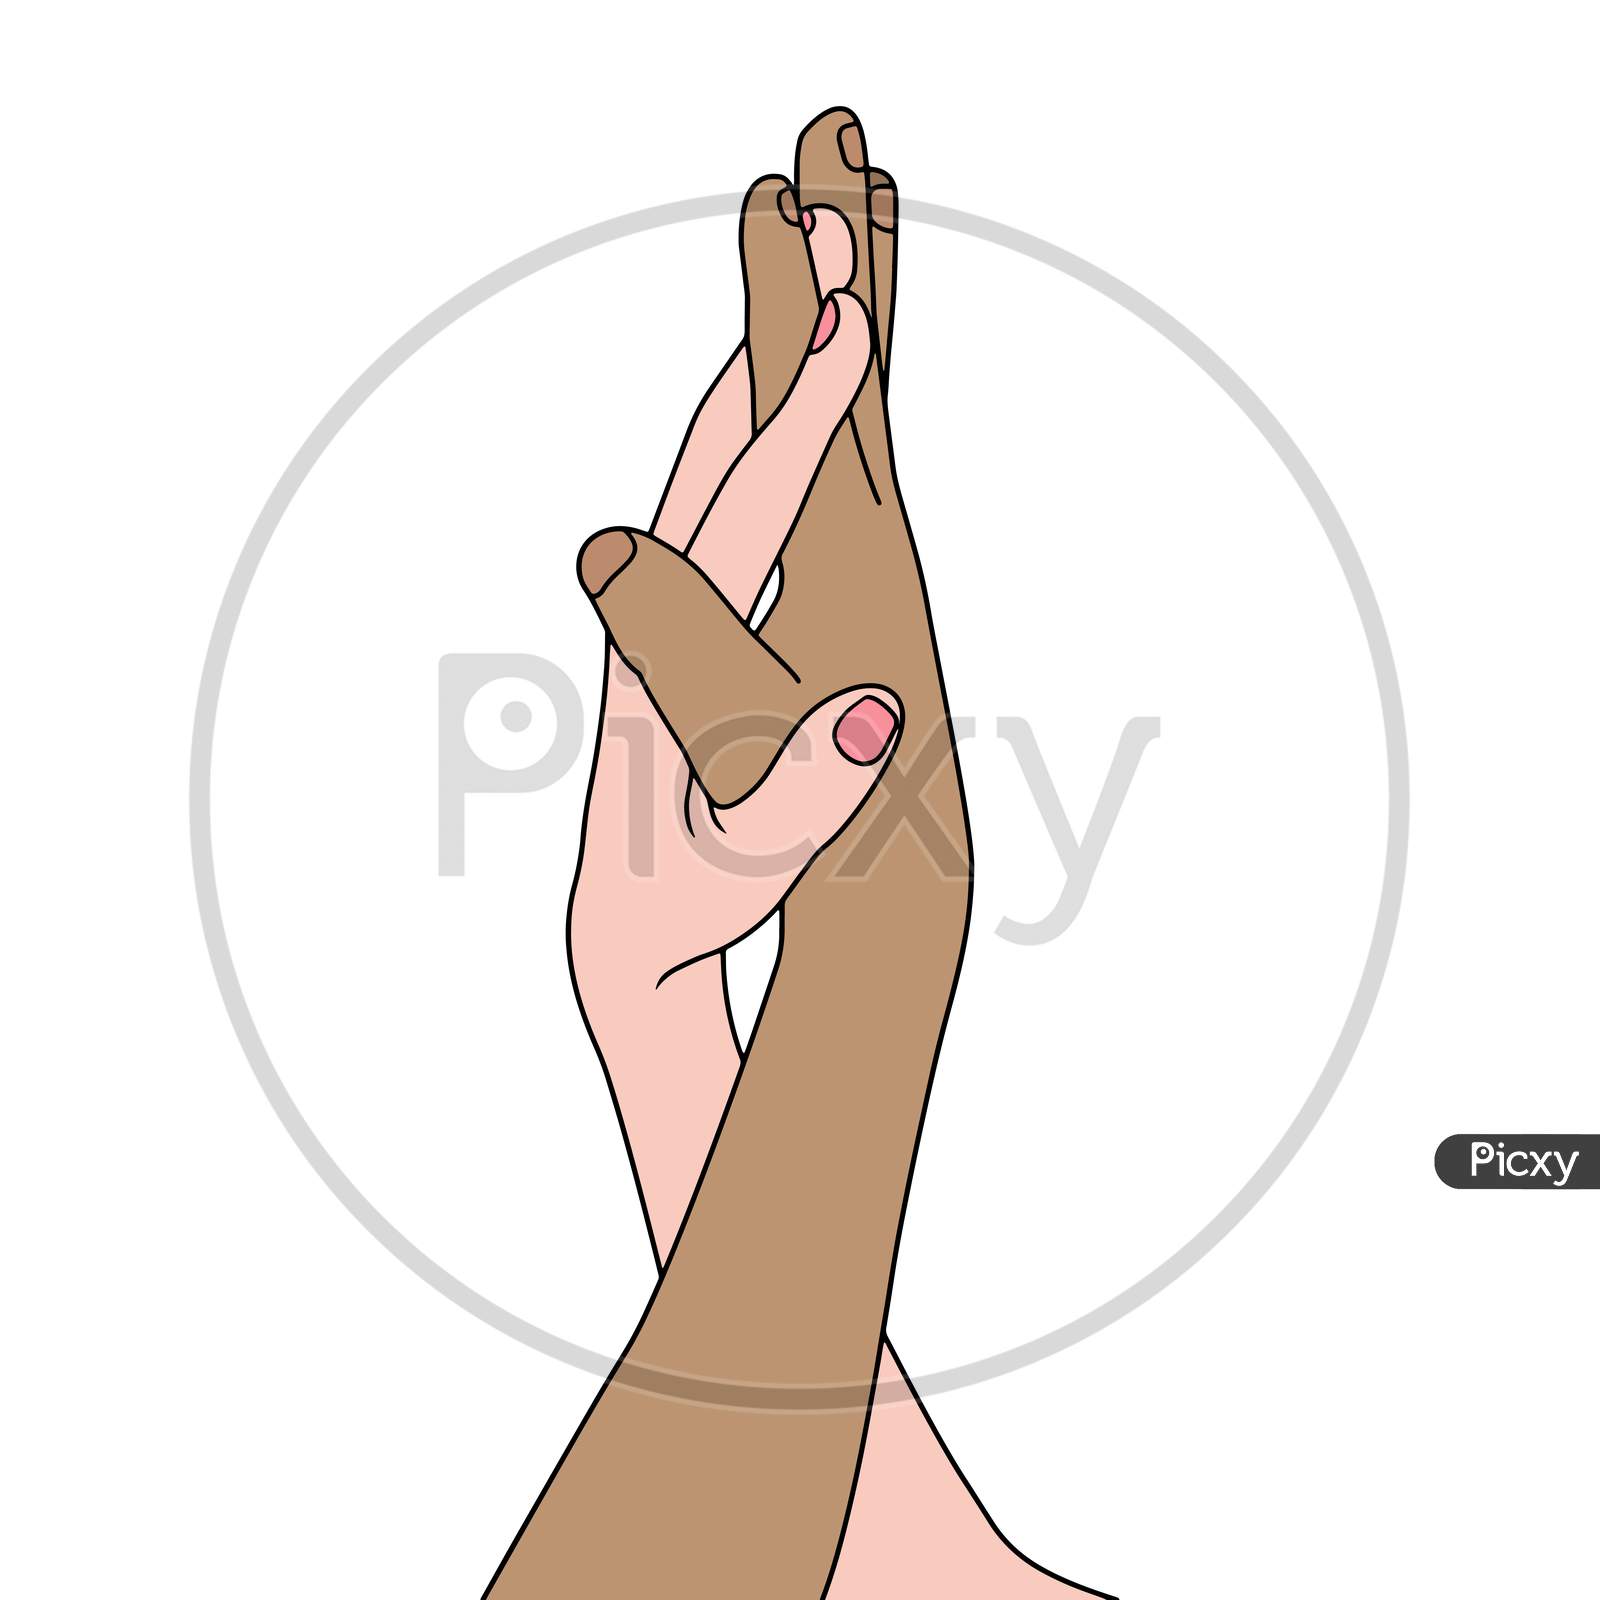 Hand Pose Two Hands Holding Hands Strong Handshake Friendly Support Concept  Business Symbol Compete Or Symbolized Conflict To Gethers Human Success  Stock Illustration - Download Image Now - iStock